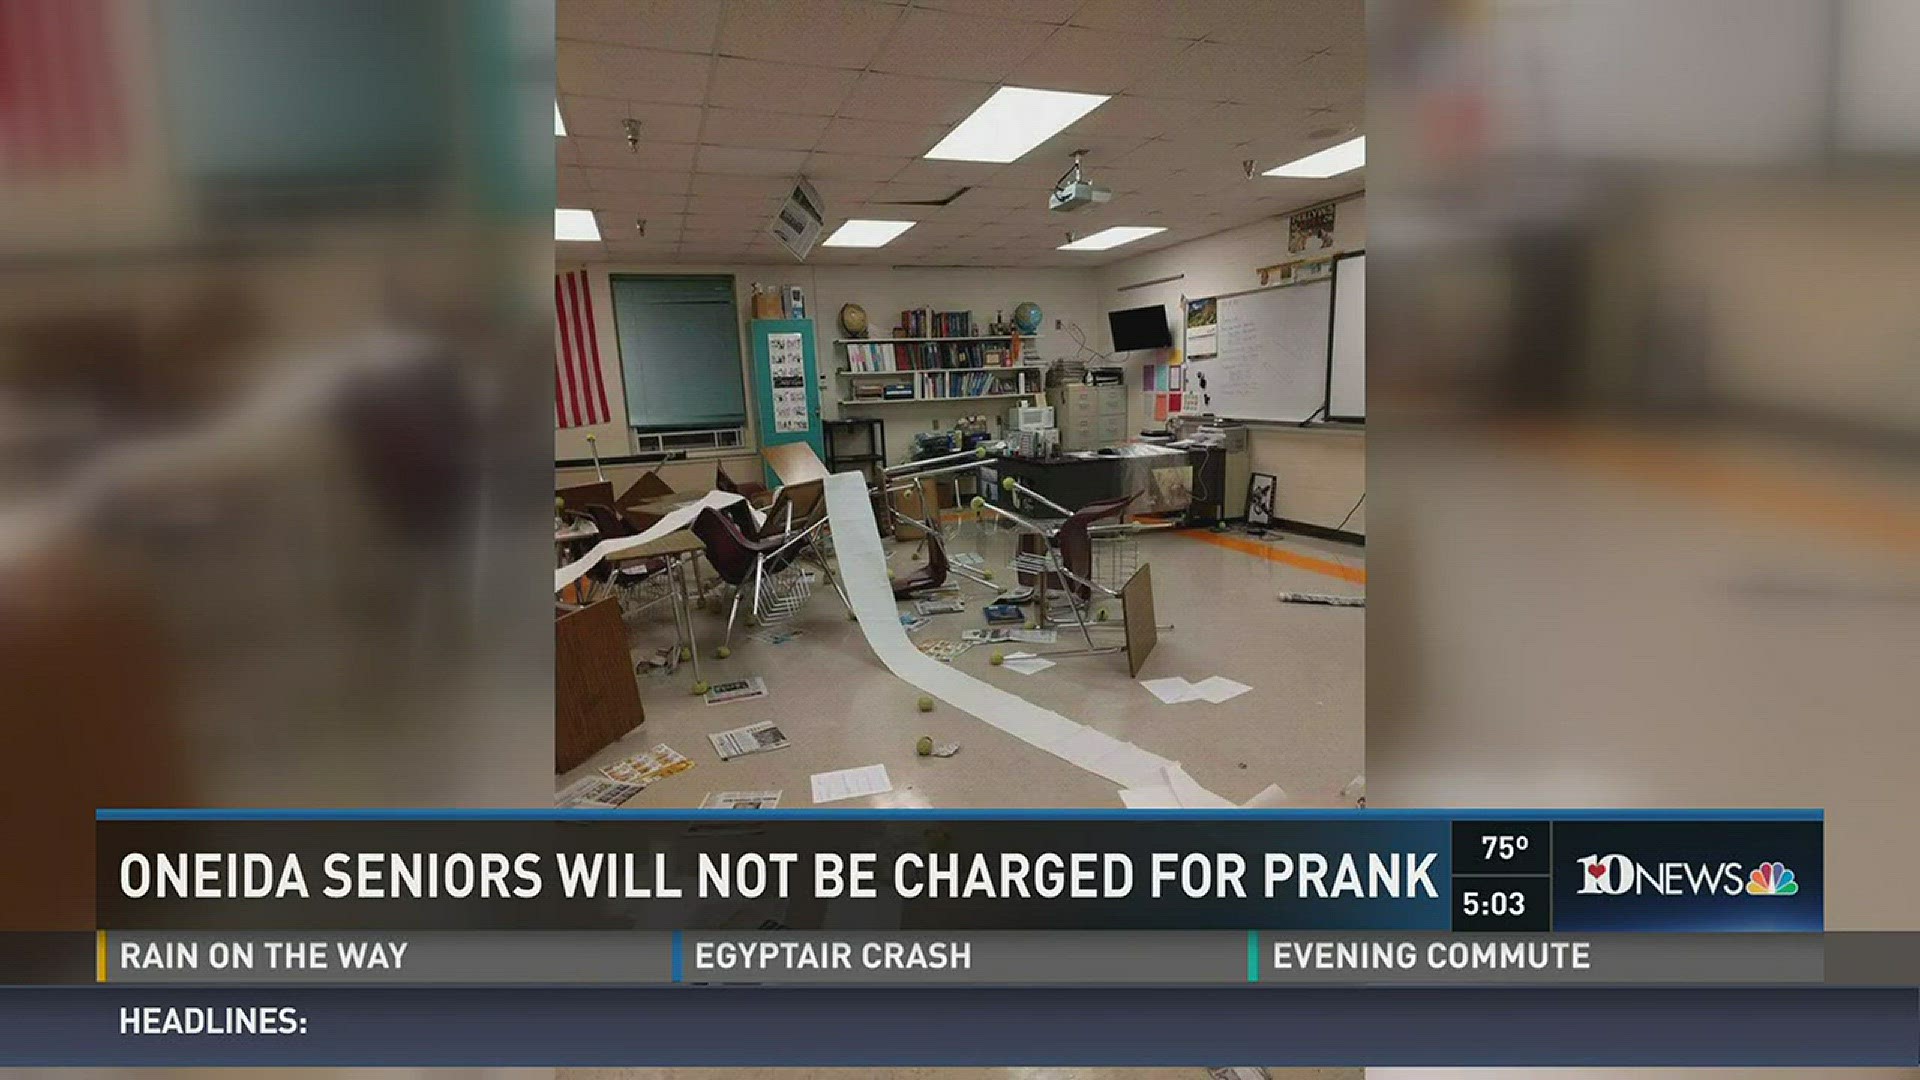 A group of about 30 graduating students will have to do 16 hours of community service after trashing Oneida High School for a senior prank late Tuesday night.